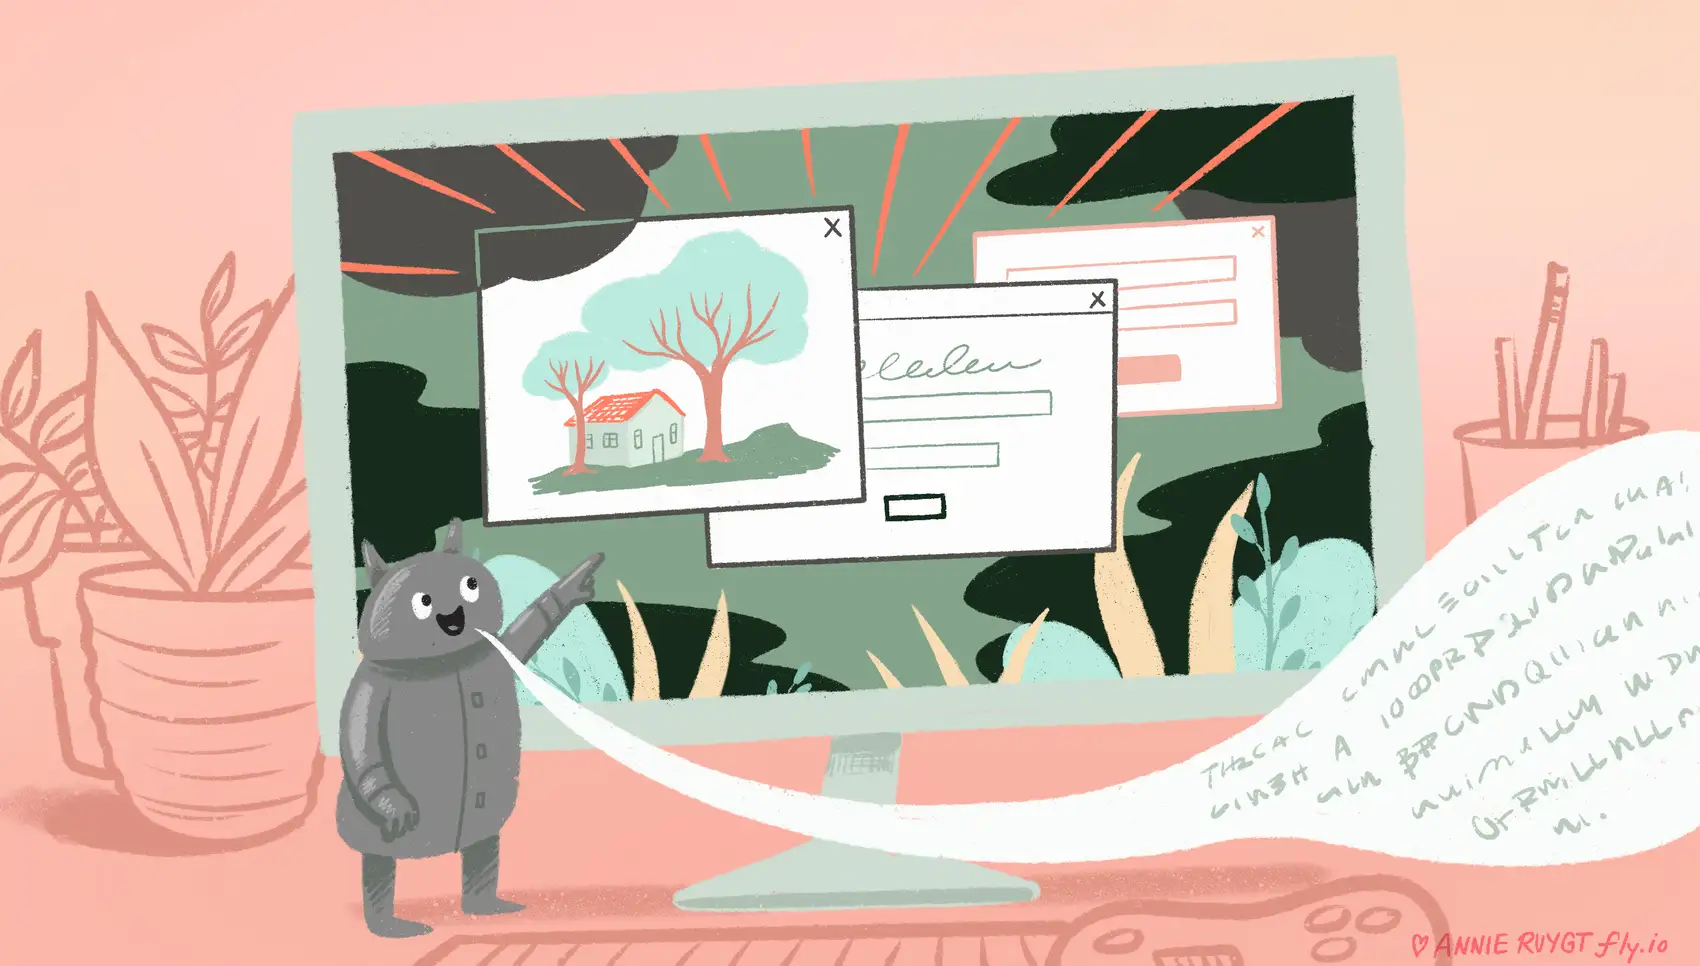 A cartoon of a smiling robot looking at a computer screen with an image of trees and a house; it's emitting a speech bubble with a stream of made-up character shapes representing its description.